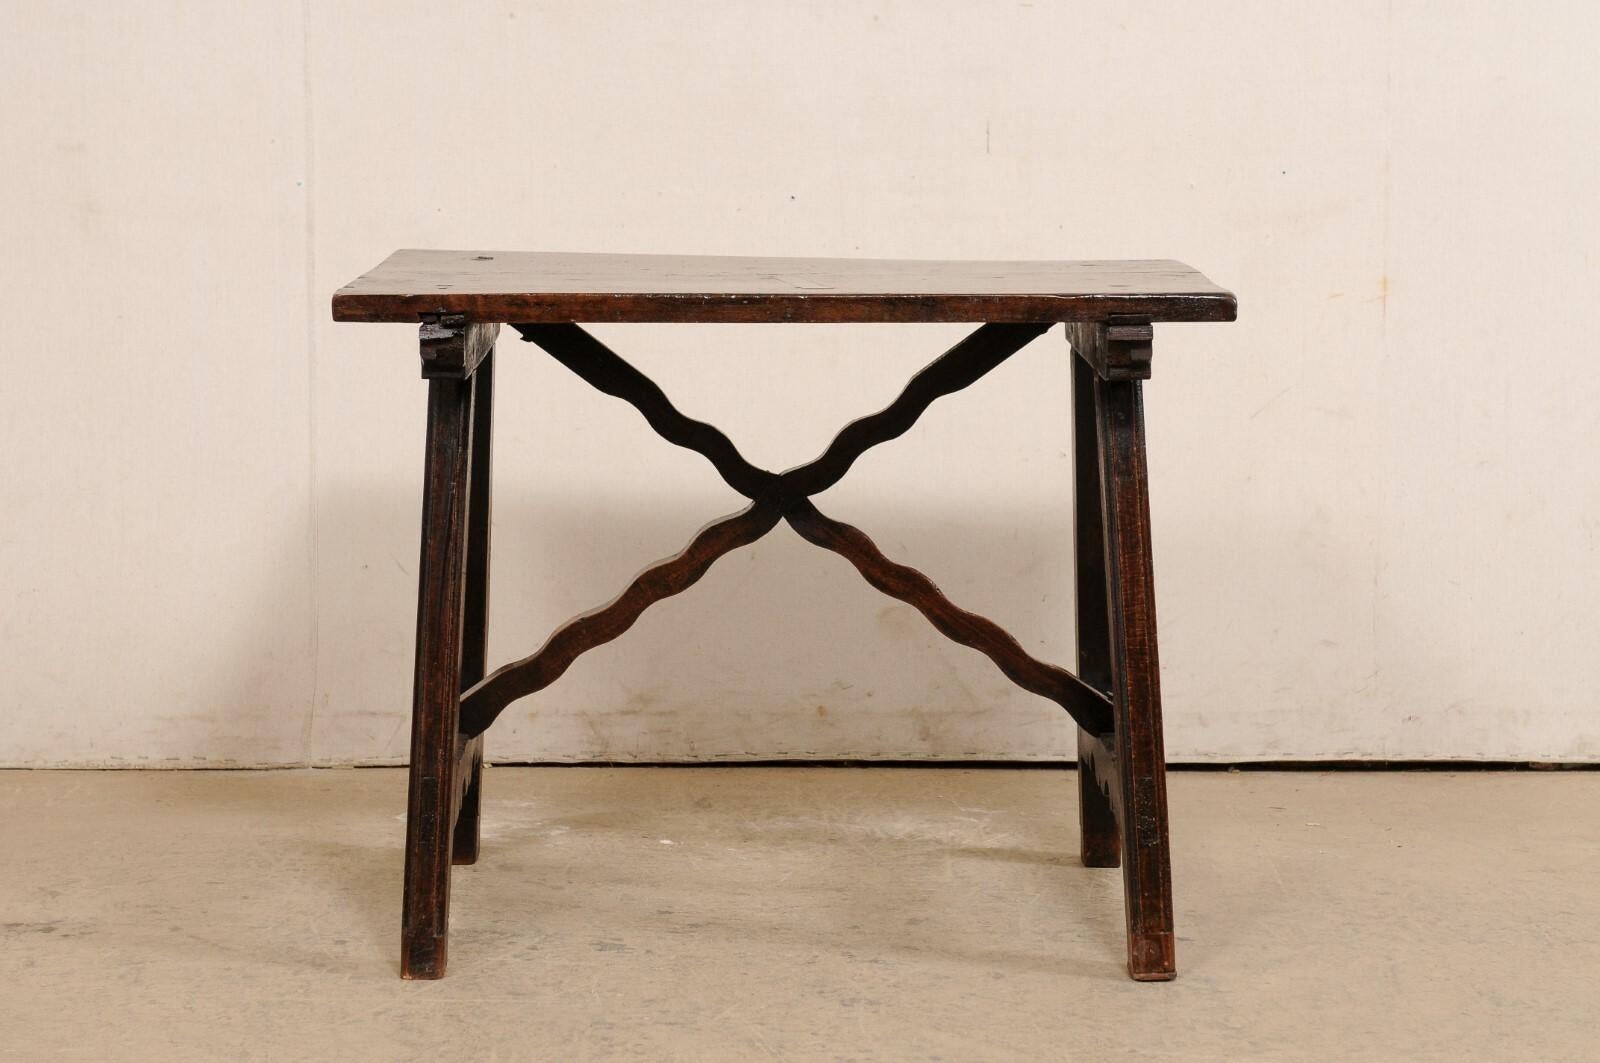 18th C. Spanish Table with a Wavy X-Stretcher at Underside For Sale 2